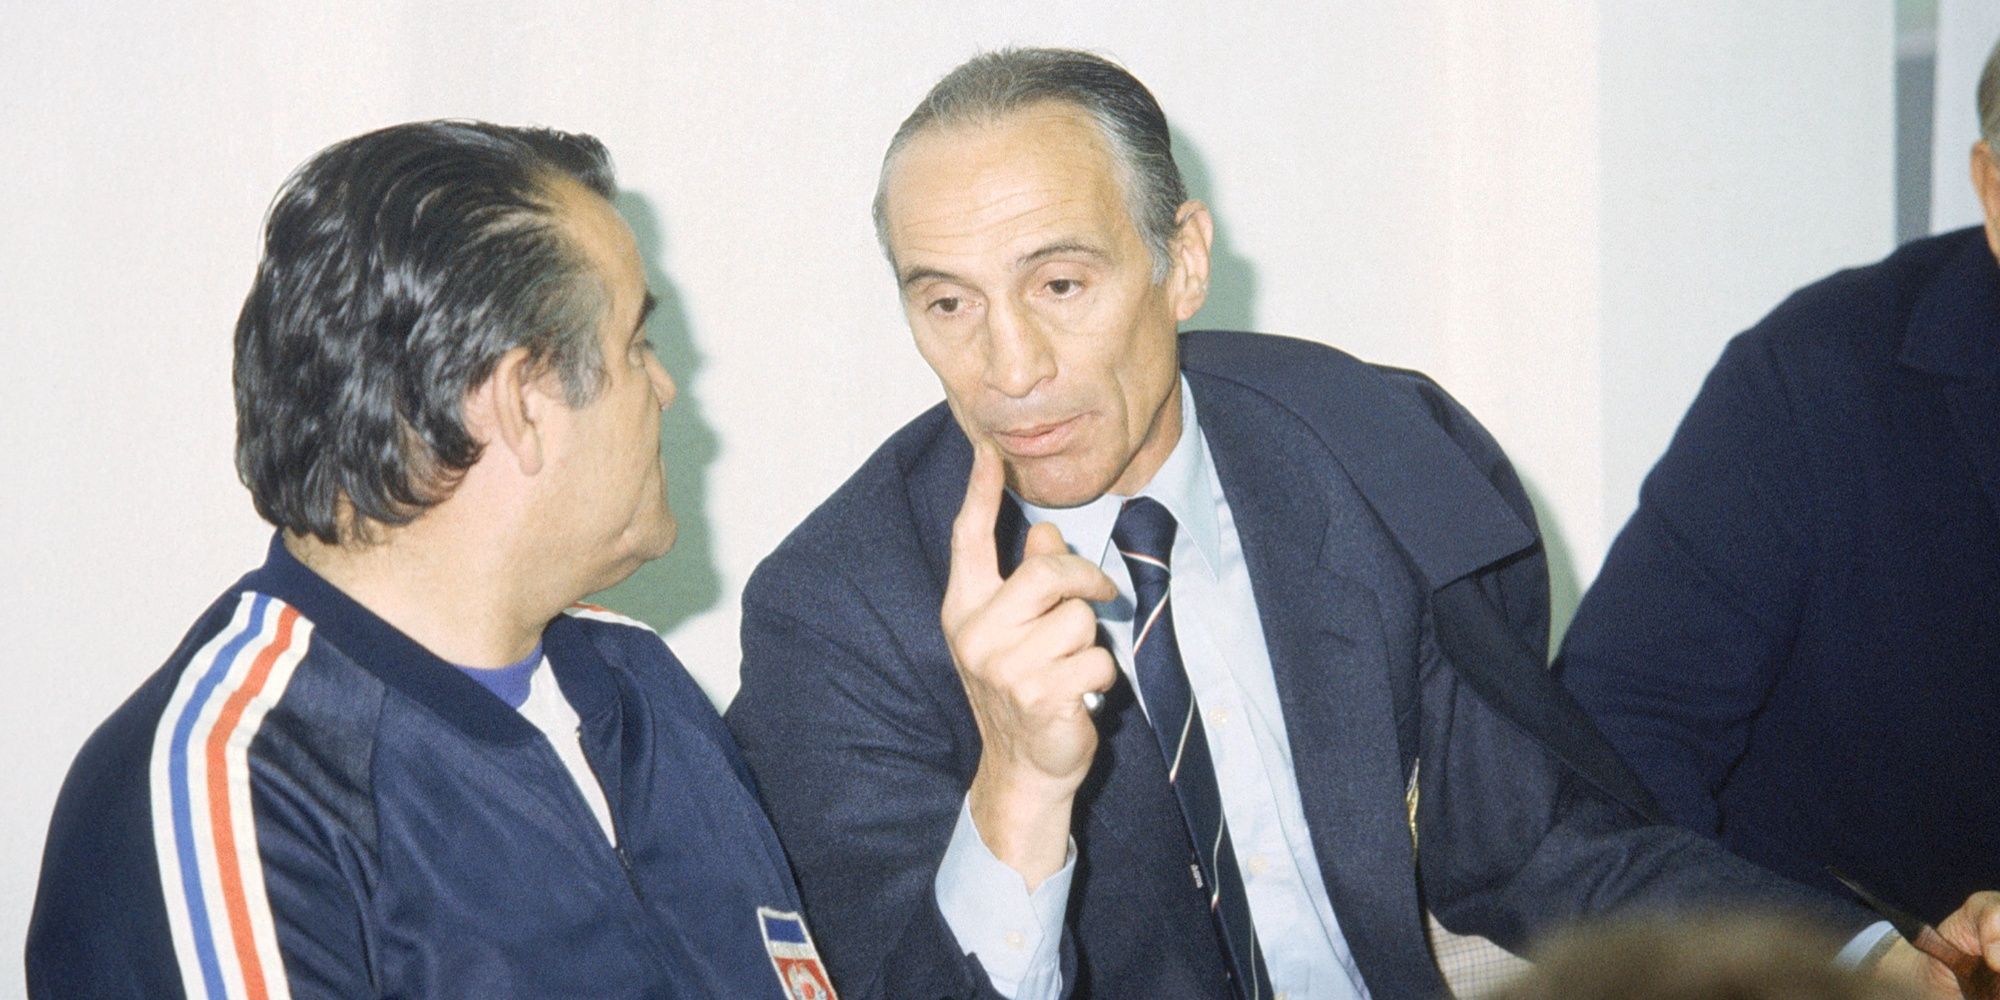 Enzo Bearzot, on the right, in 1970